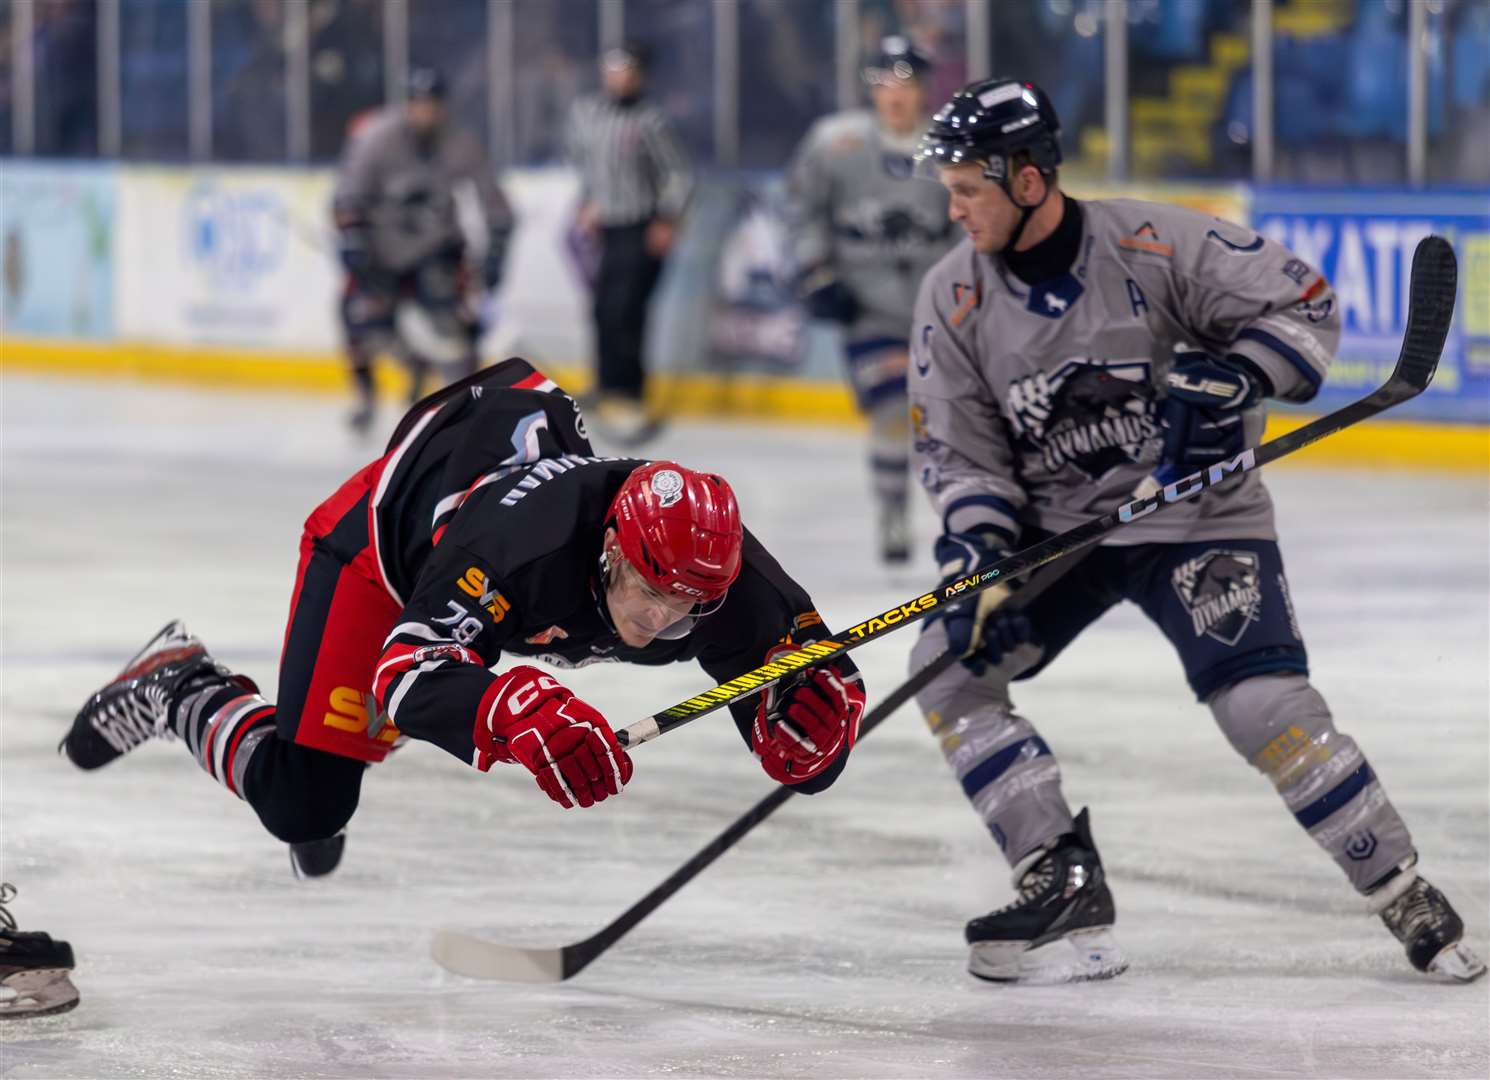 Action between Invicta Dynamos and Streatham Redhawks in the Southern Cup semi-final at Planet Ice, Gillingham Picture: David Trevallion